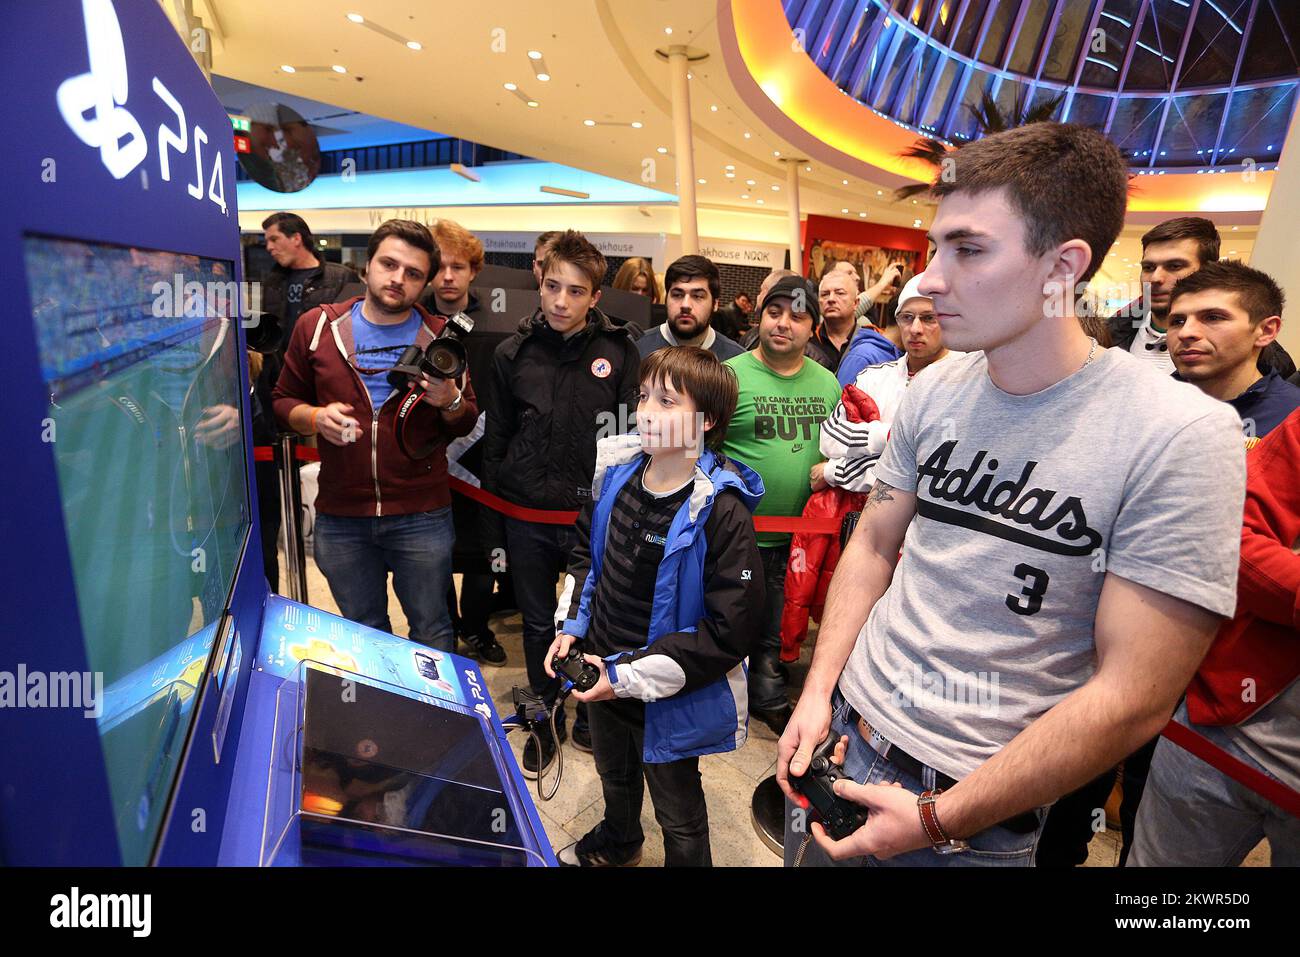 28.01.2014., Zagreb, Croatia - Tournament in playing games on Playstation 4 was held in the store Sancta Domenica. After that, at midnight started the official sale of Playstation 4. Andrija Galic was one of the winners of the tournament who won new Playstation 4 console. Photo: Anto Magzan/PIXSELL  Stock Photo